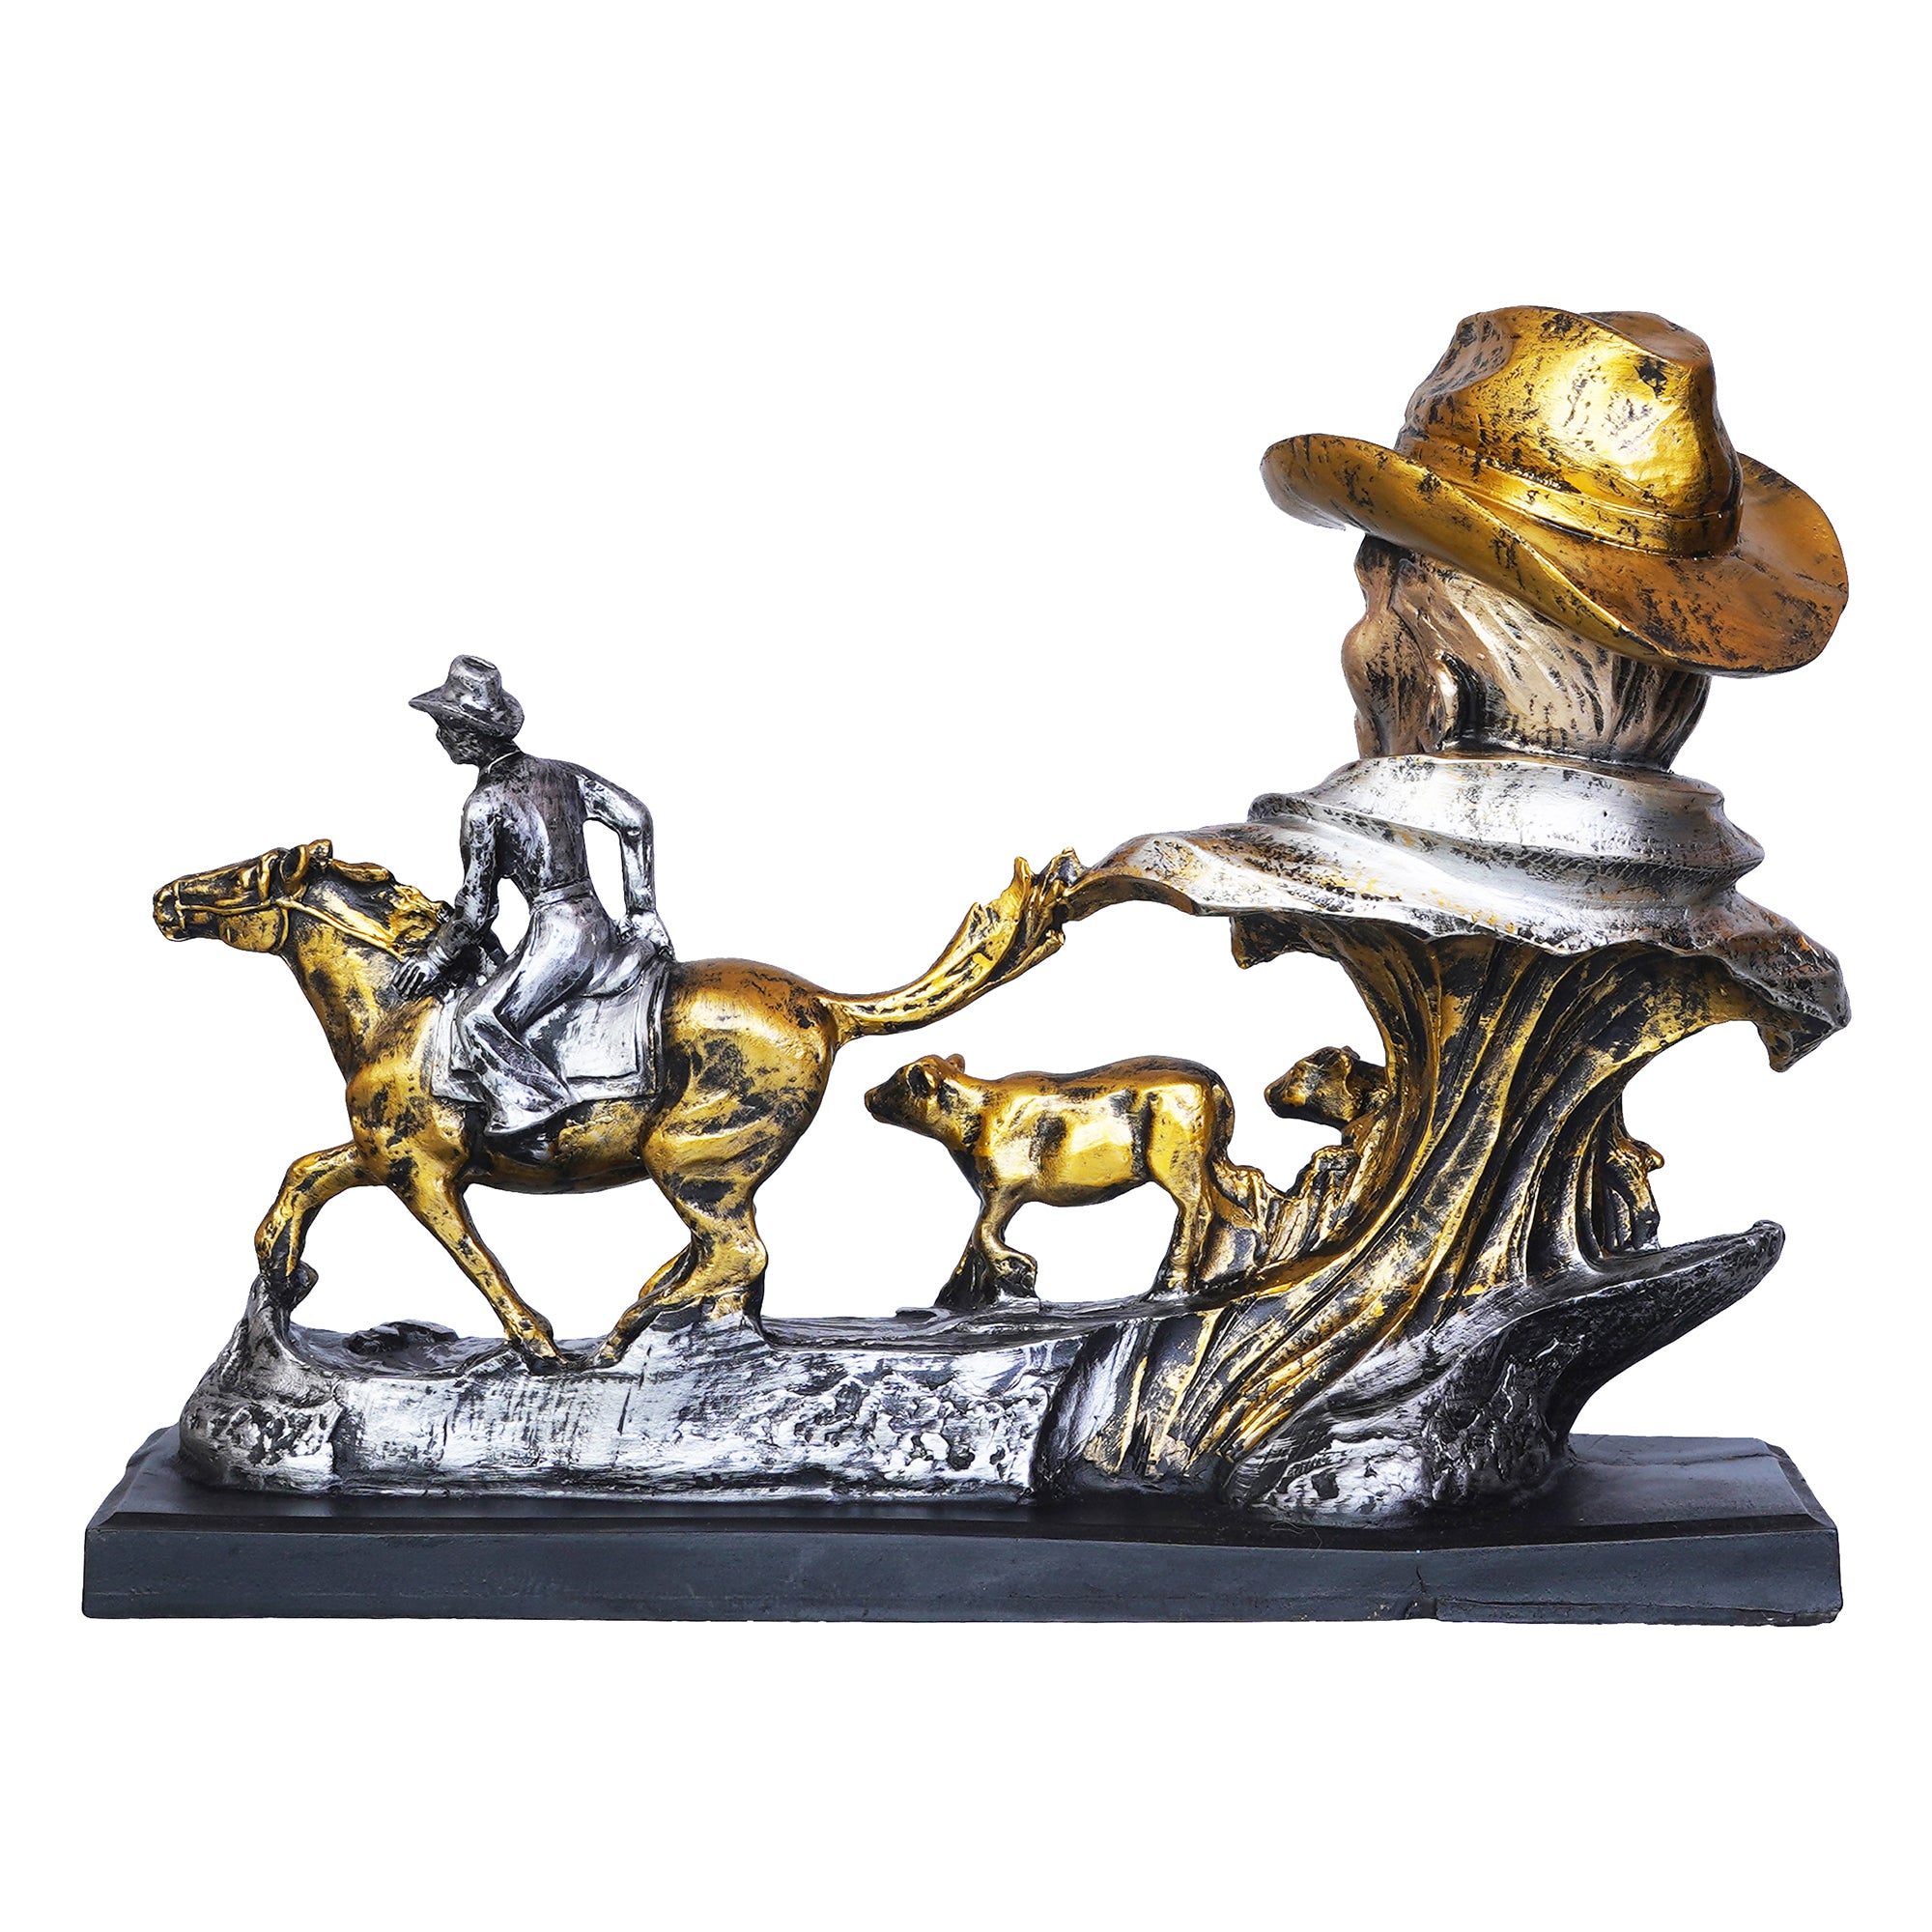 Antique Cowboys Face with Boy Sitting on Running Horse & Cow Statues Decorative Showpiece 8